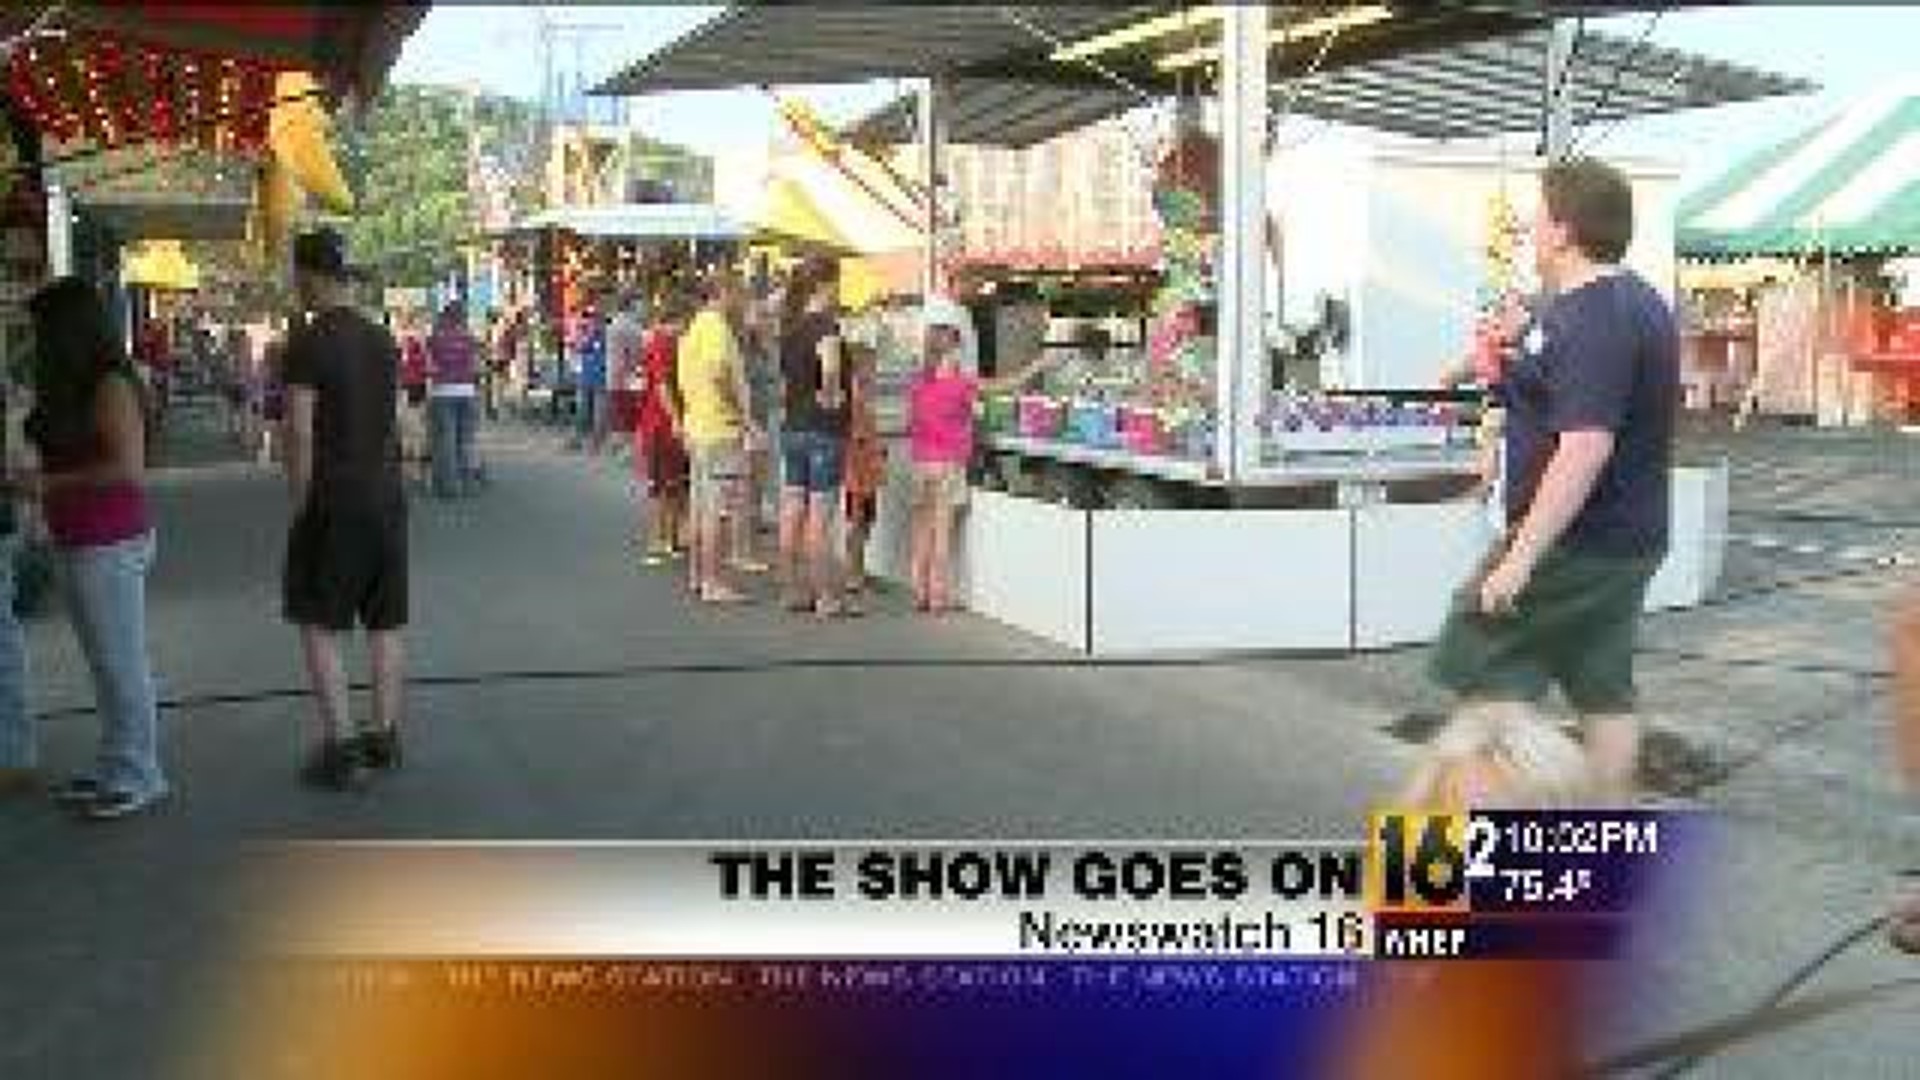 The Show Is A Go For Fire Company's Carnival